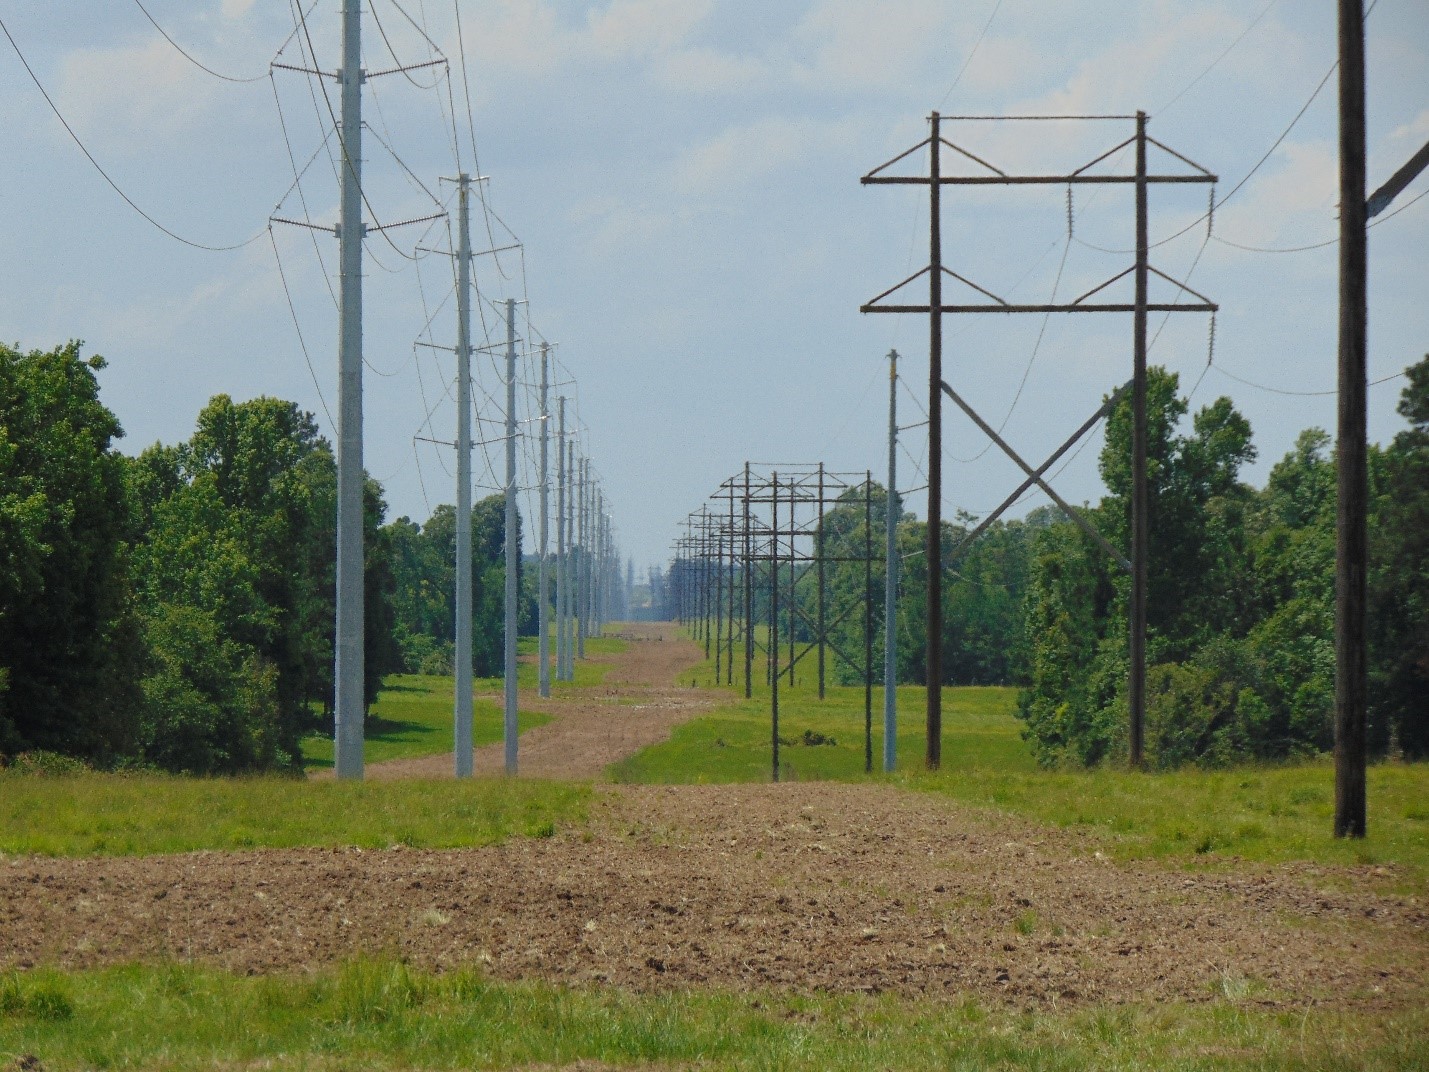 The new 230 kV transmission line between the Lewis Creek Substation near Willis, Texas, and the new Rocky Creek Substation west of Huntsville, Texas.